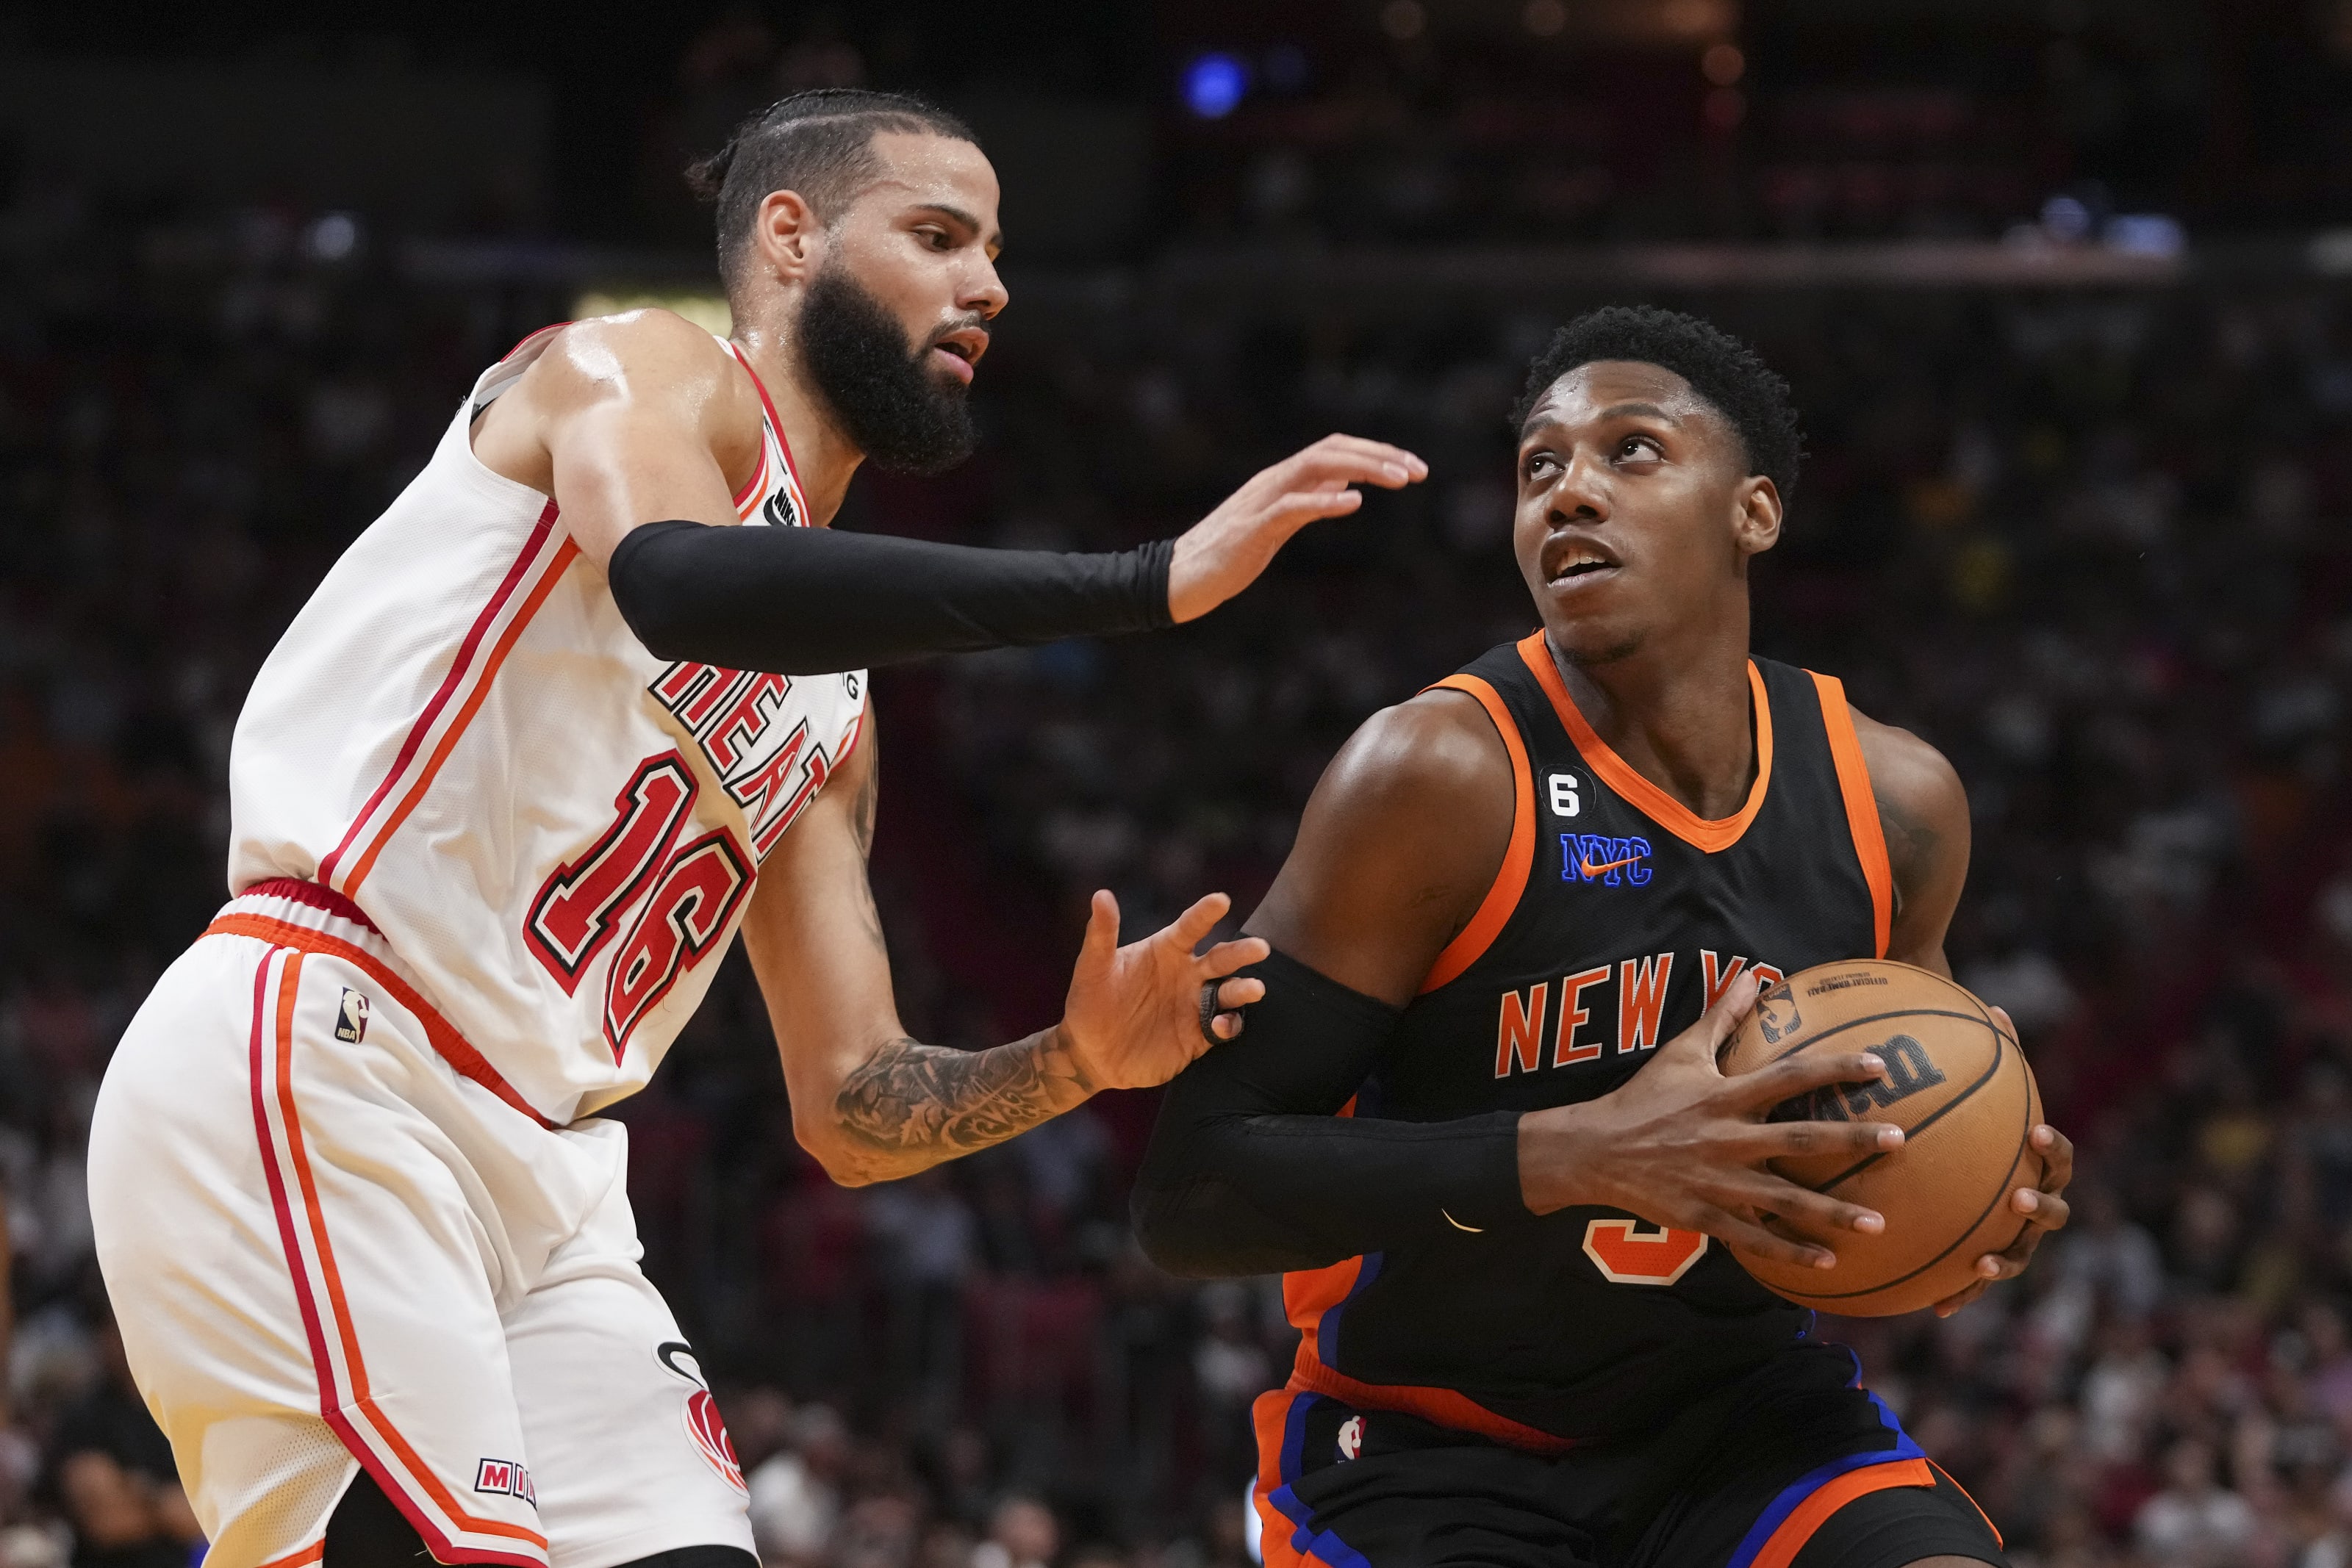 Can Miami Heat fight off the New York teams to avoid play-in scenario?